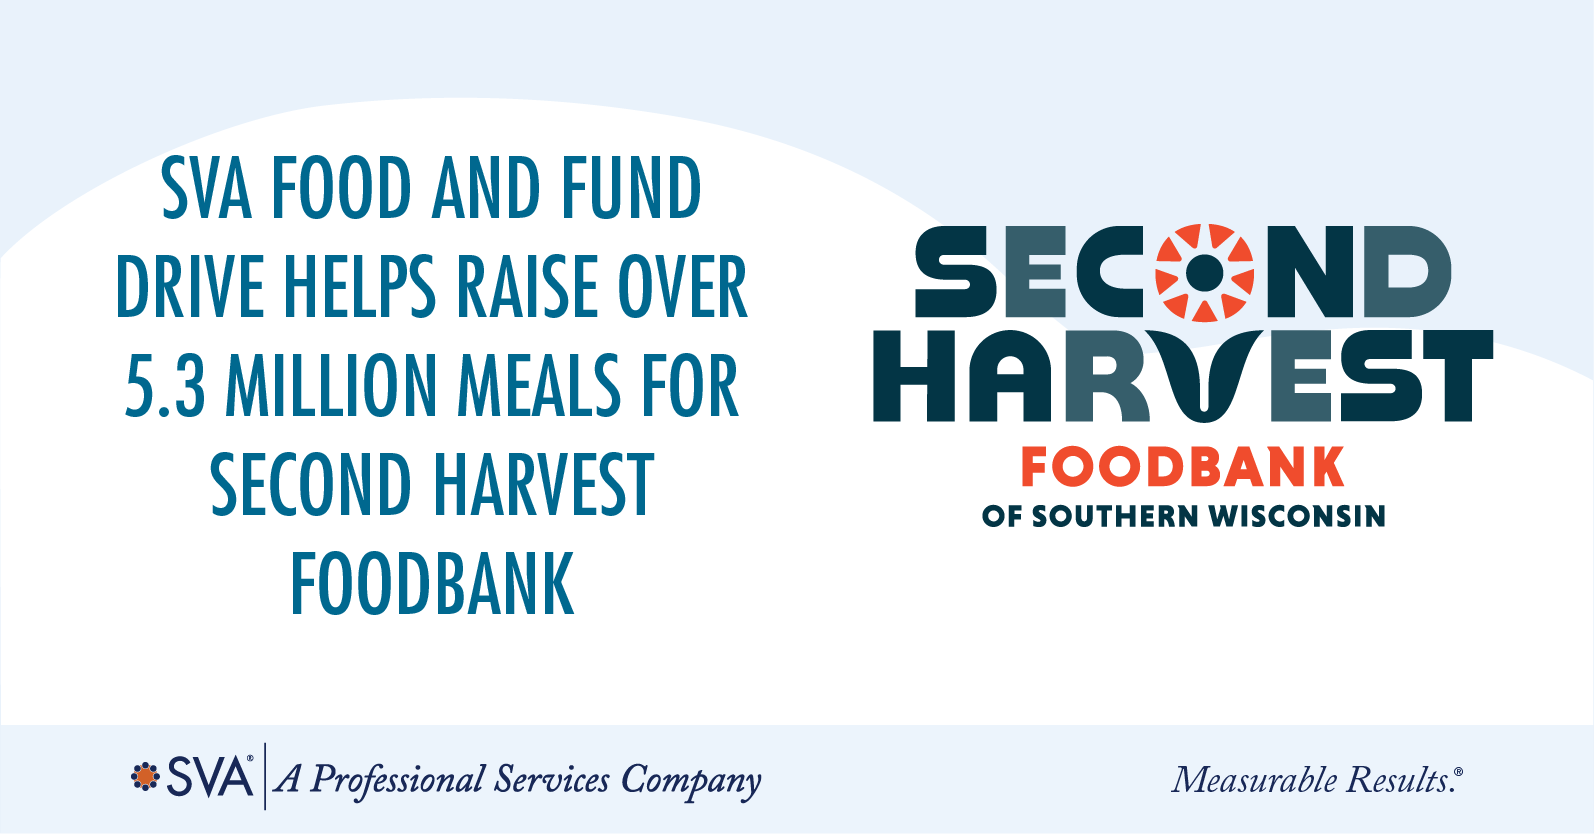 sva-food-and-fund-drive-helps-raise-over-5.3-million-meals-for-second-harvest-foodbank